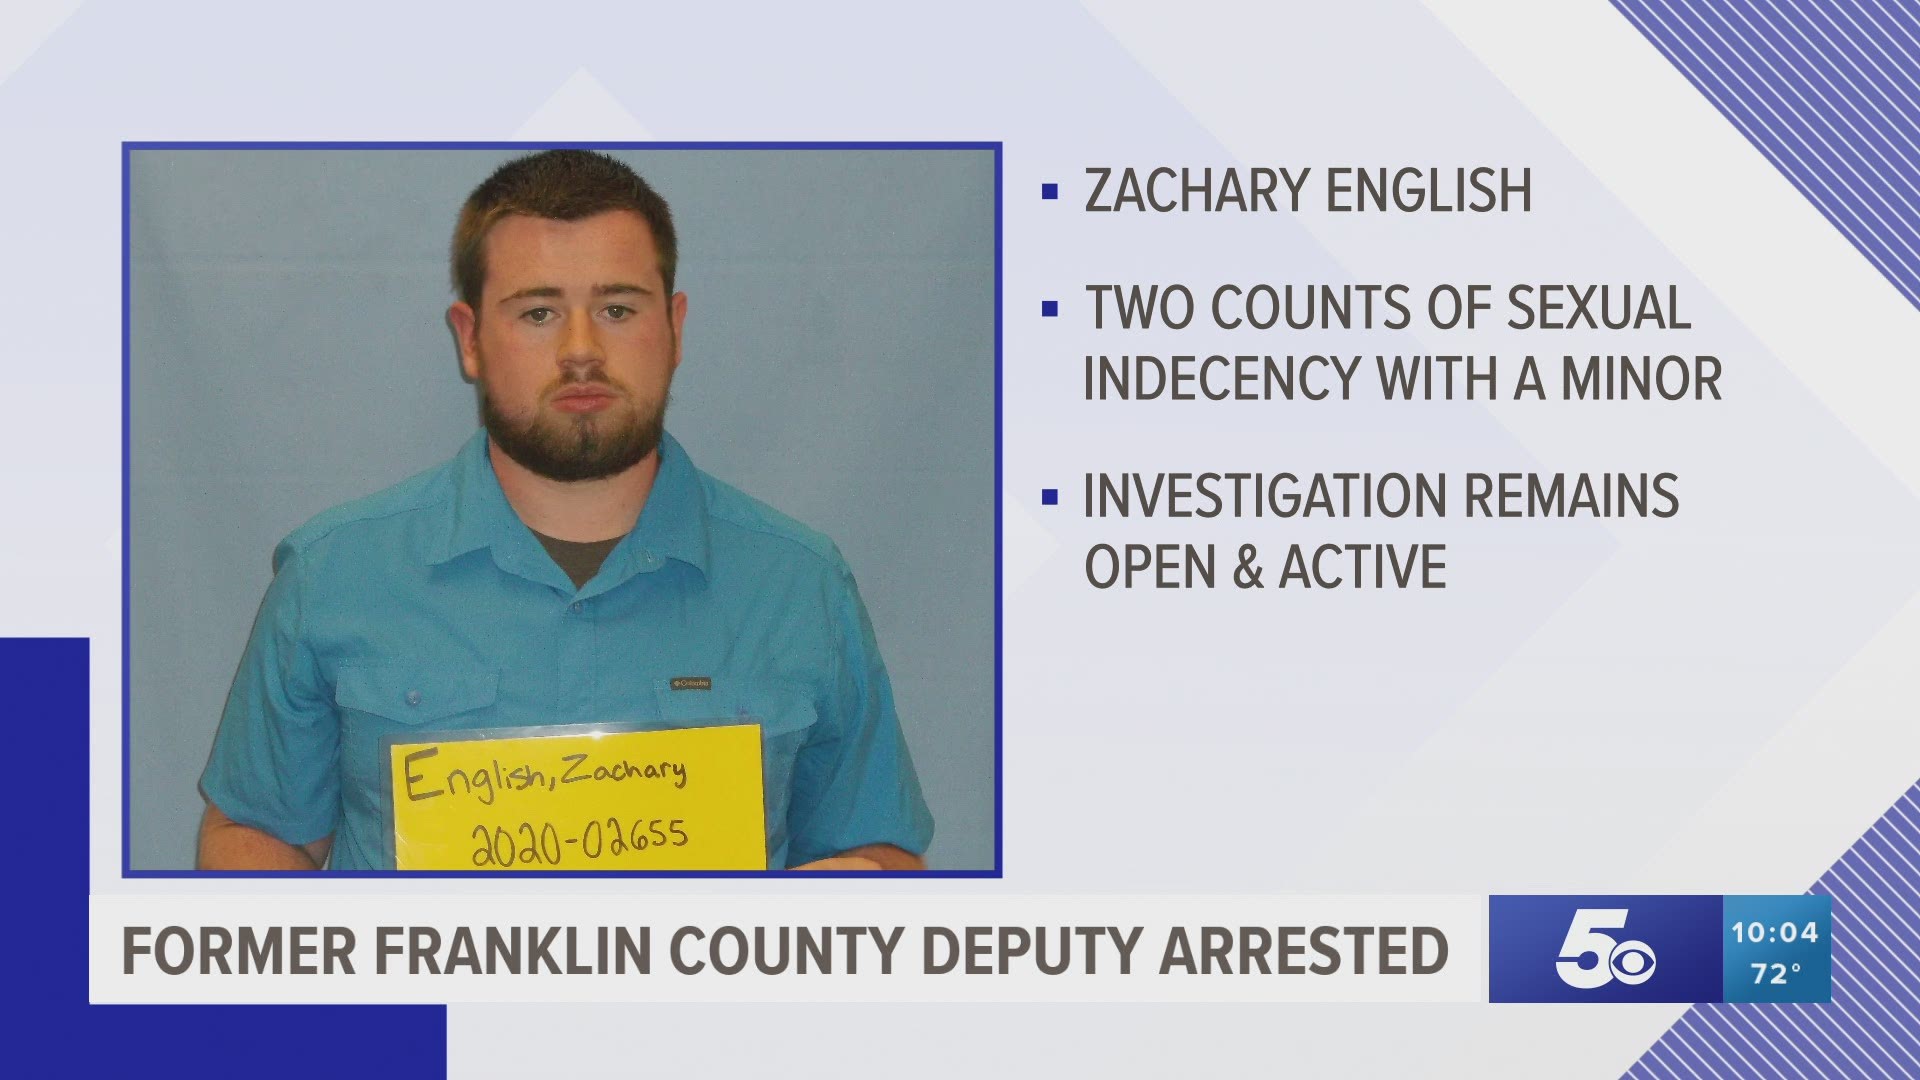 Zachary English was charged at the time of the arrest with two counts of Sexual Indecency with a Minor. https://bit.ly/32PtuqJ